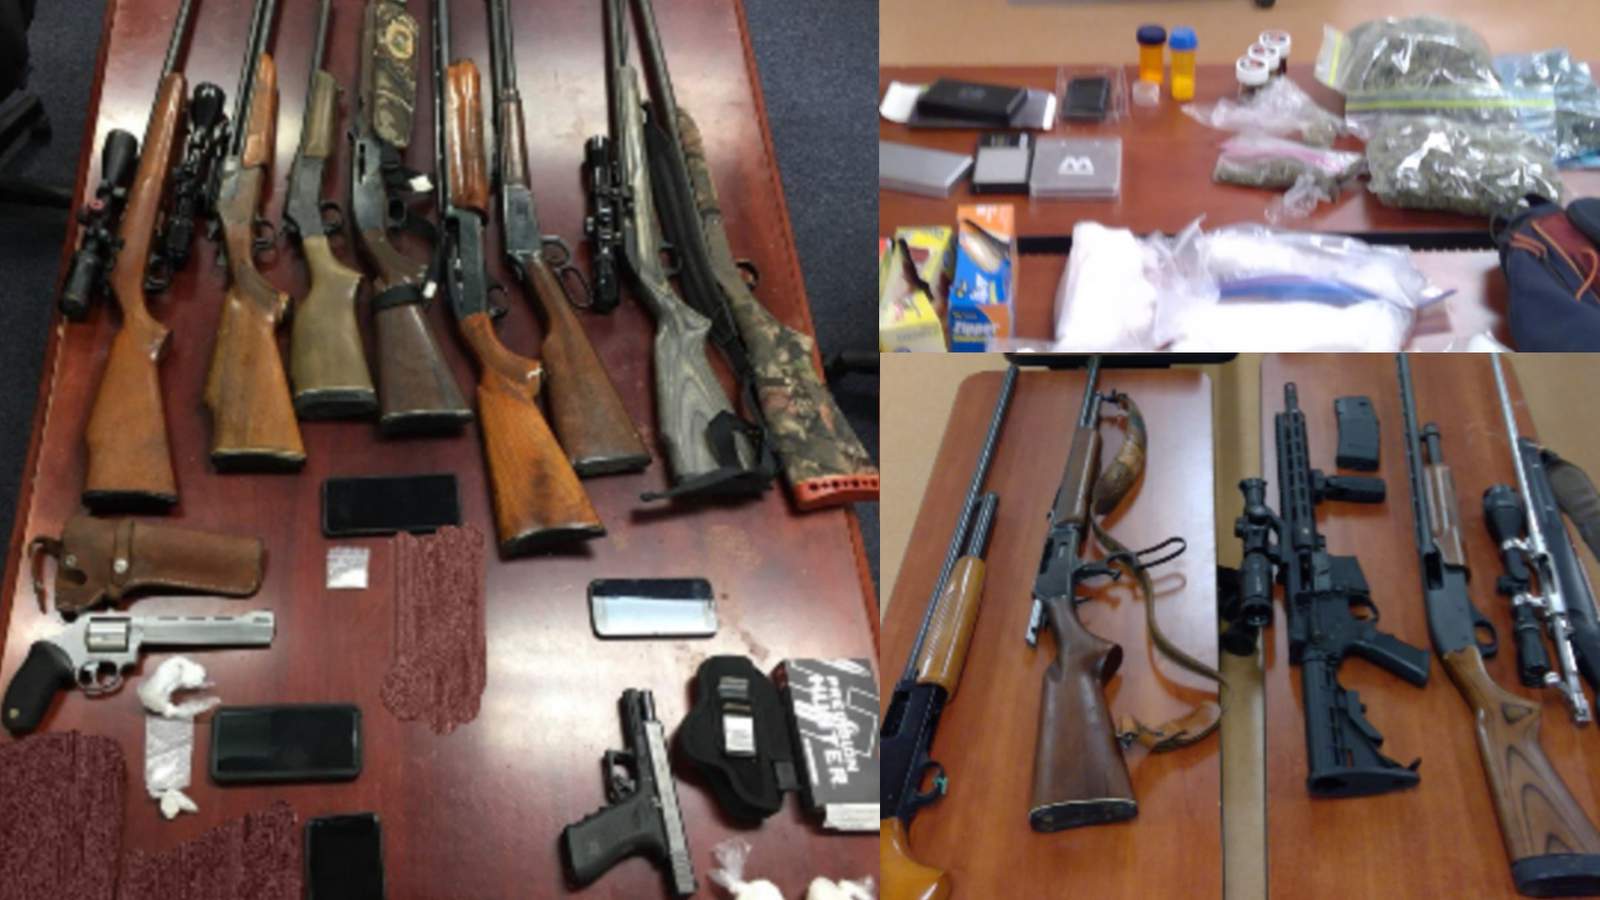 Virginia authorities seize more than $150,000 worth of drugs, 15 guns in joint operation